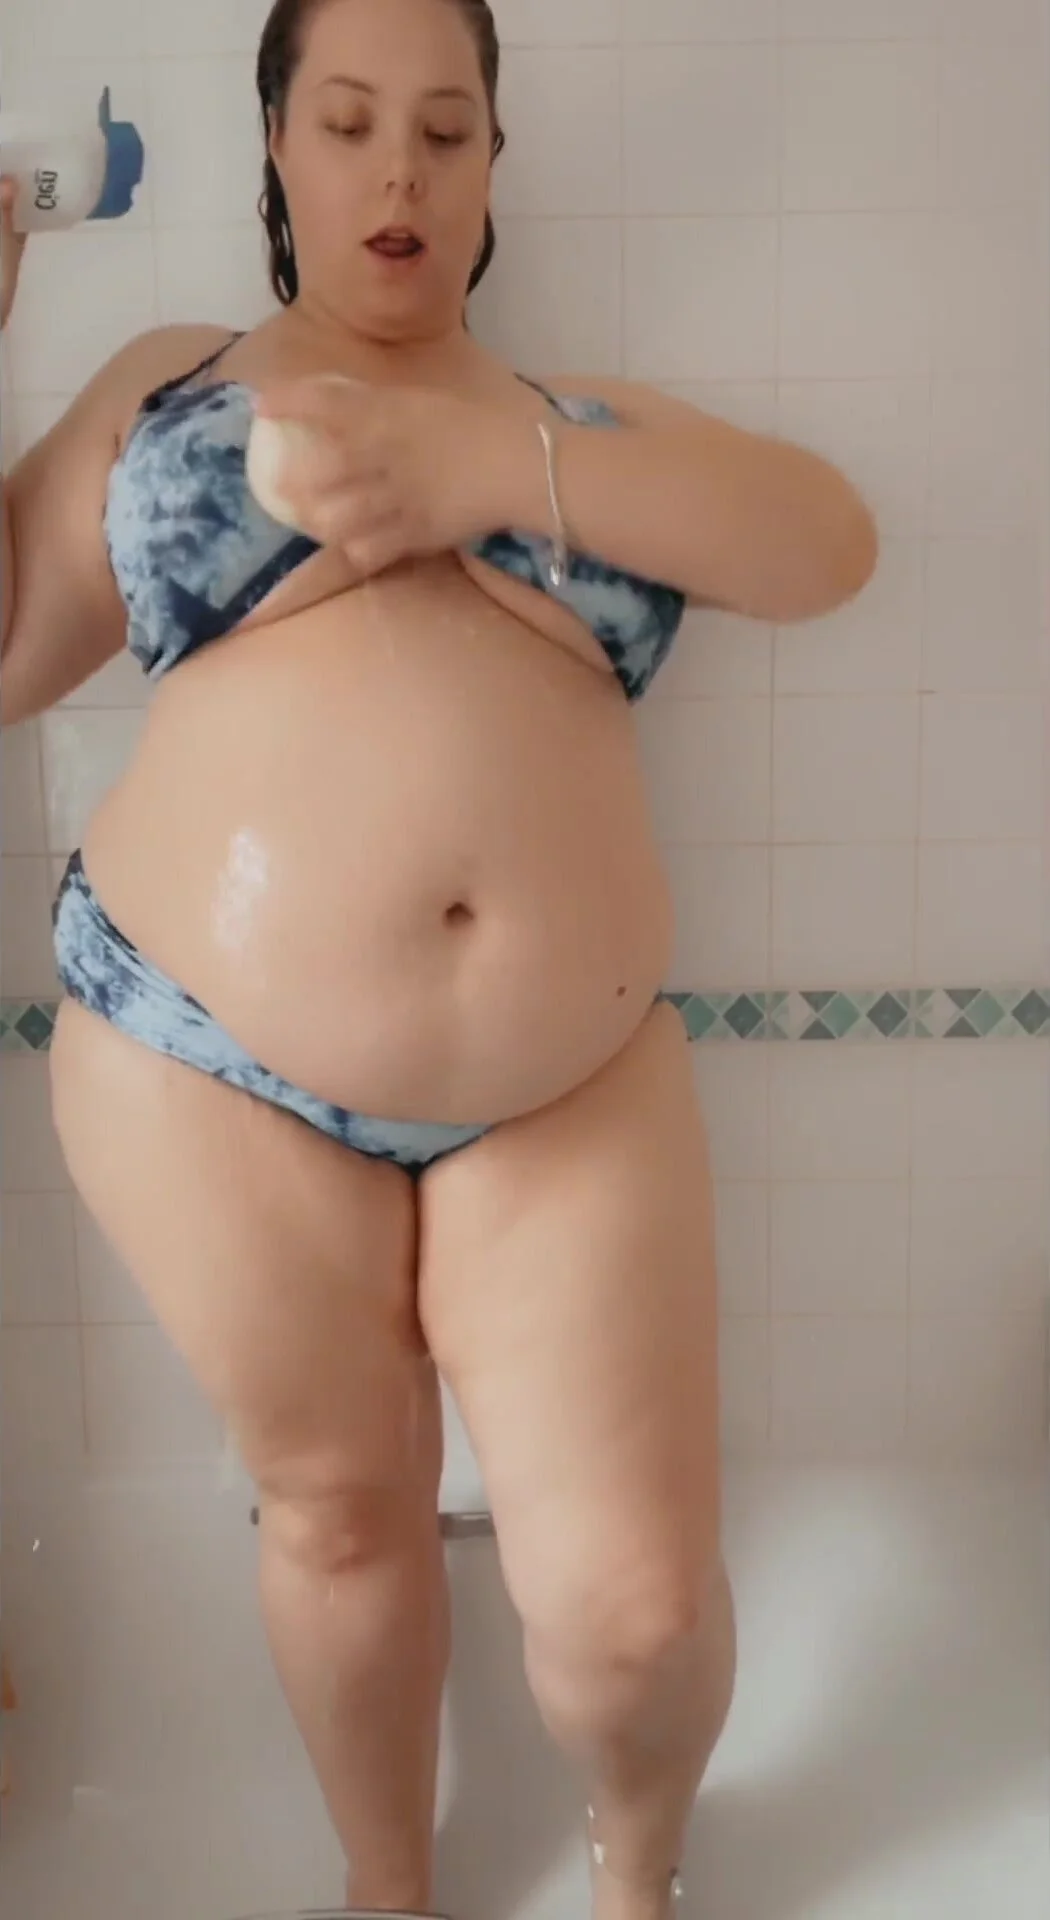 1050px x 1920px - Chubby: fat girl , fat body fat ass , fatbelly - ThisVid.com